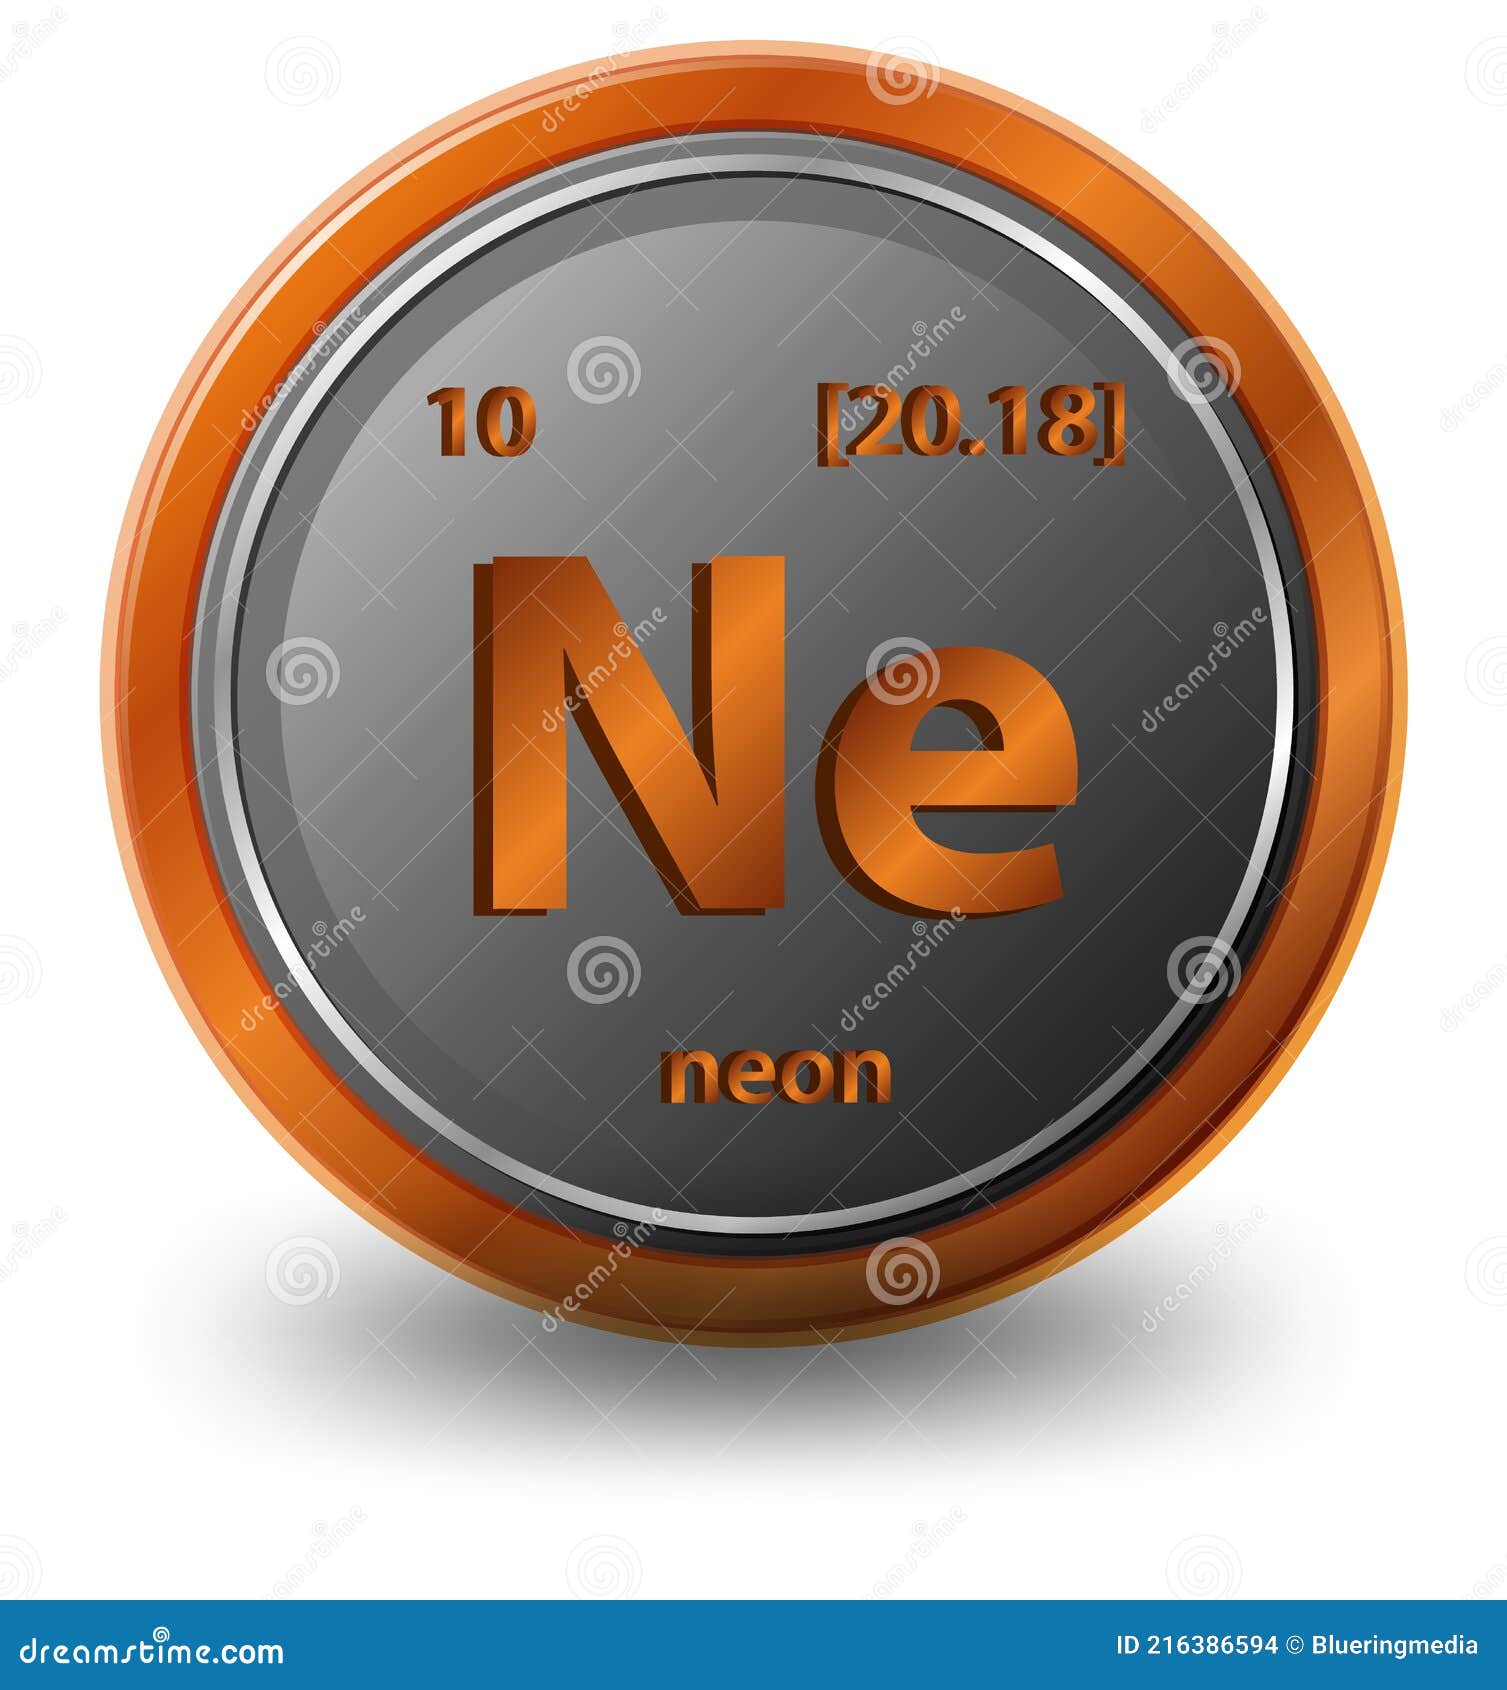 Neon Chemical Element Chemical Symbol With Atomic Number And Atomic